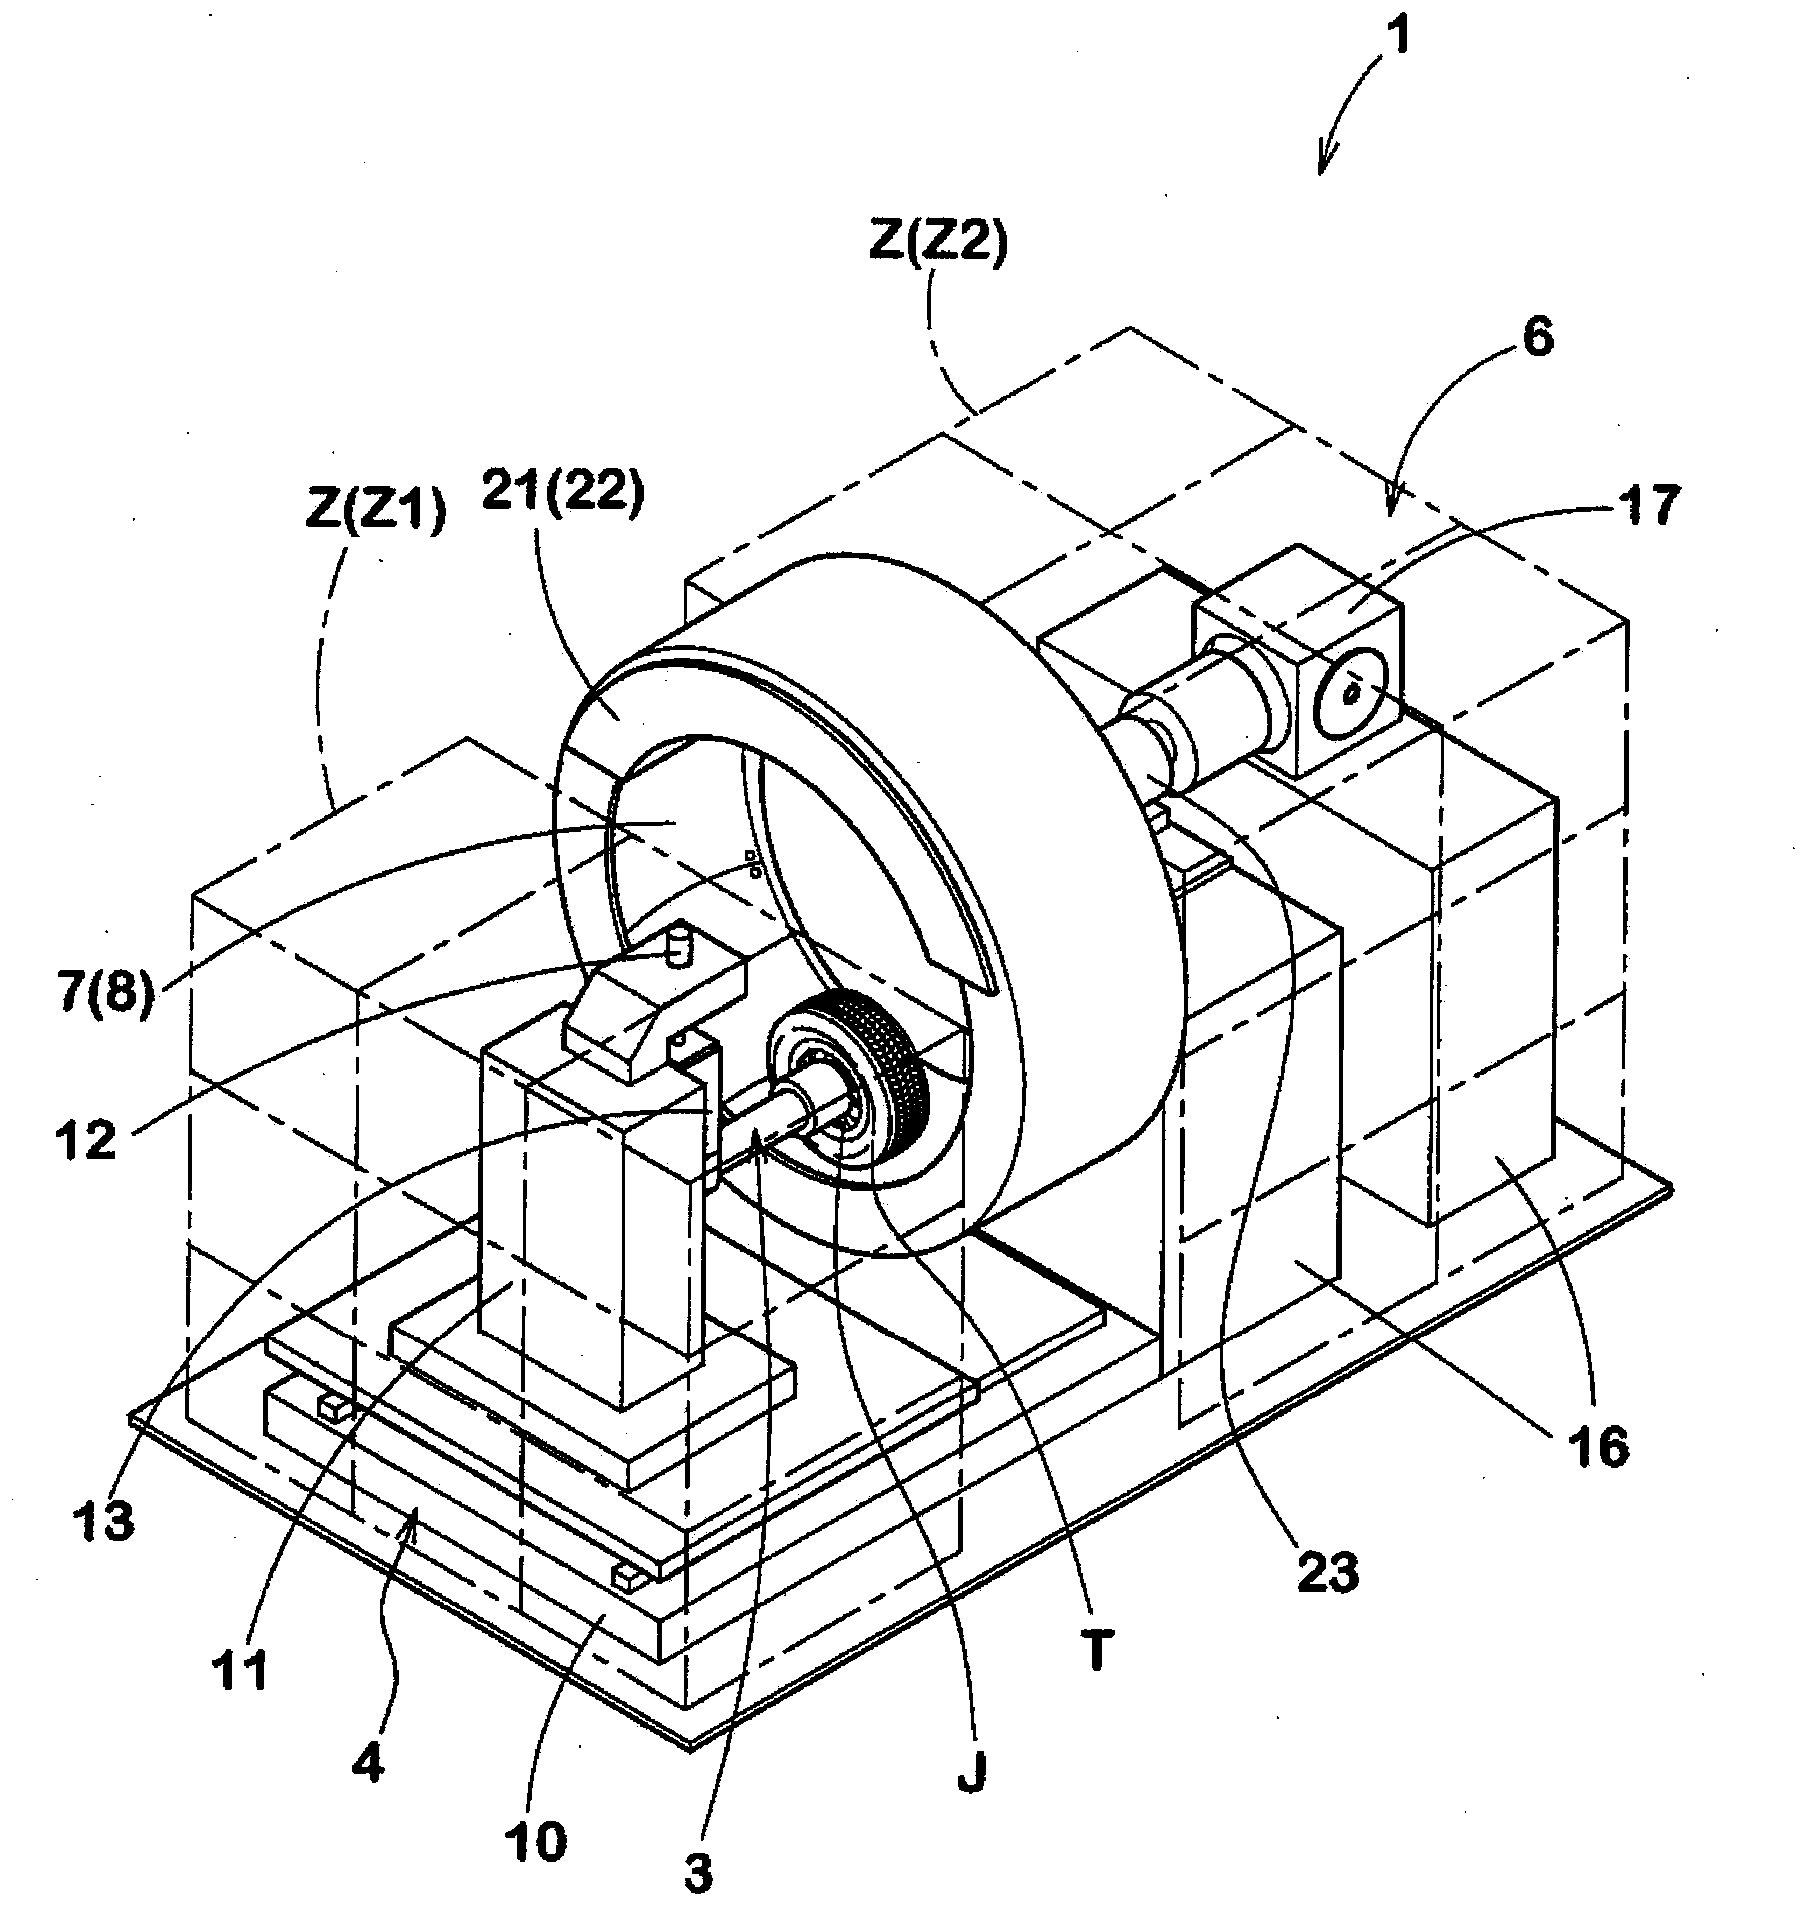 Tire bench testing apparatus and tire performance testing method using the same